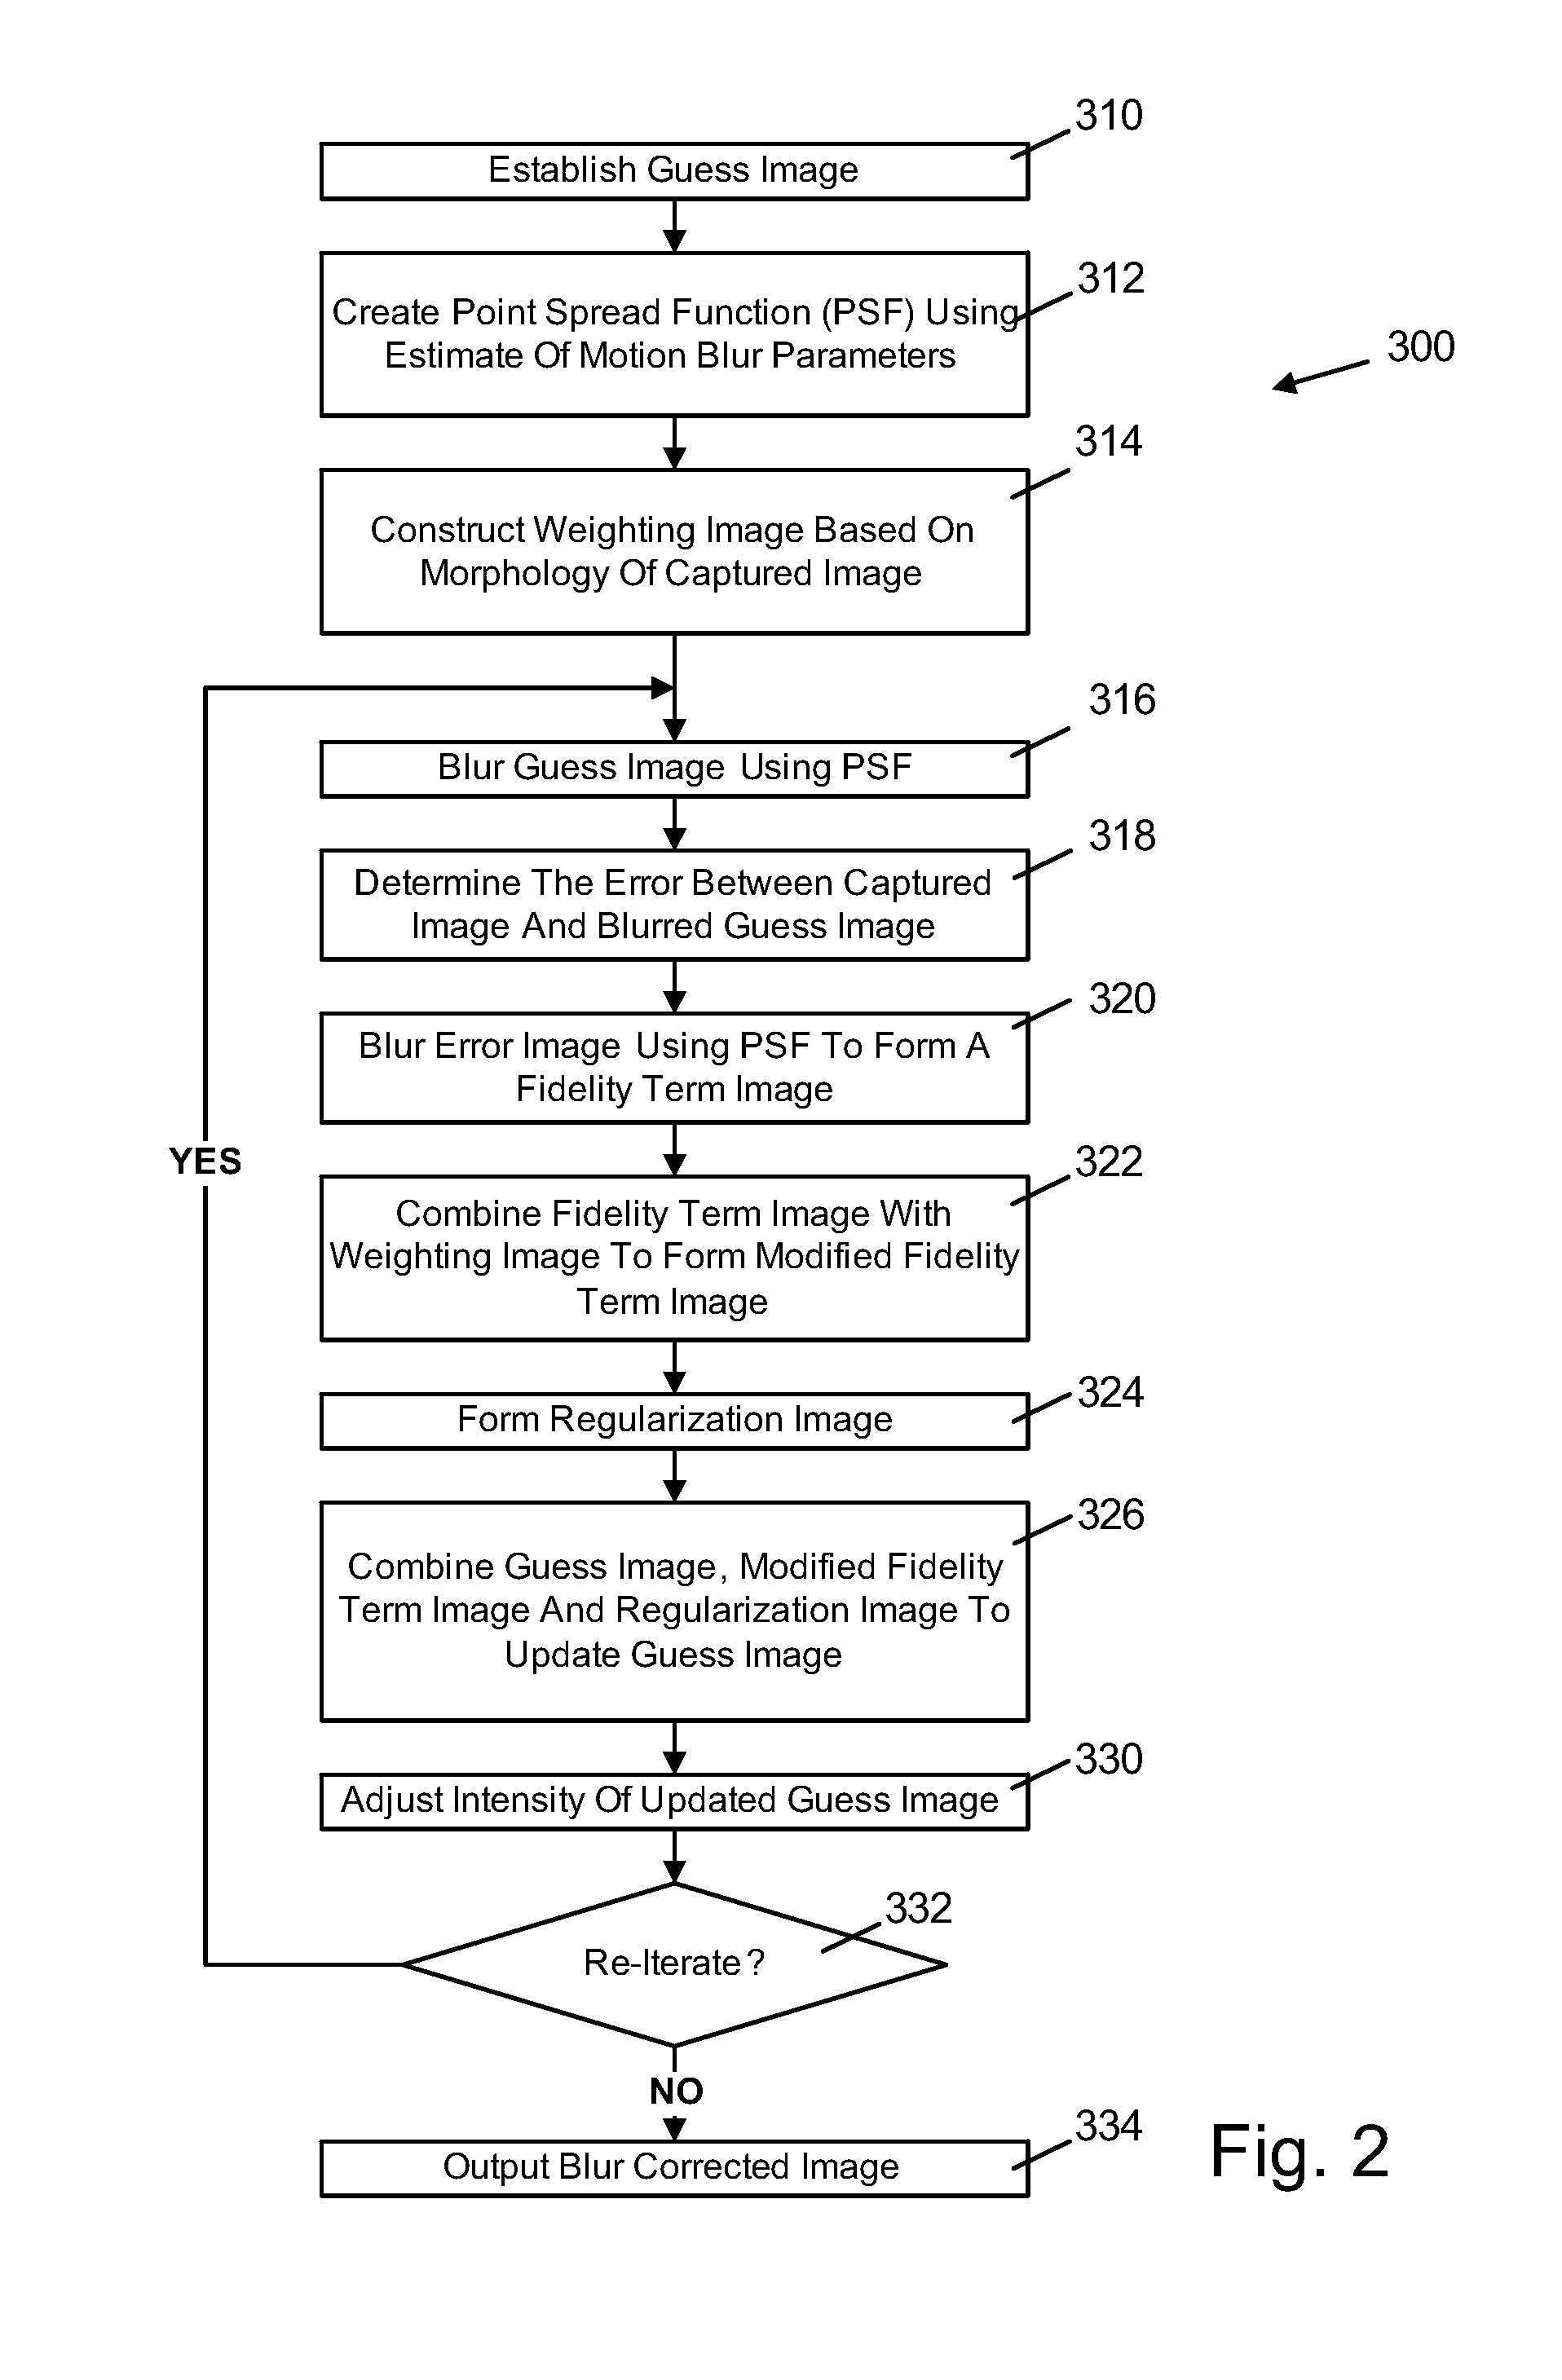 Method And Apparatus For Reducing Motion Blur In An Image